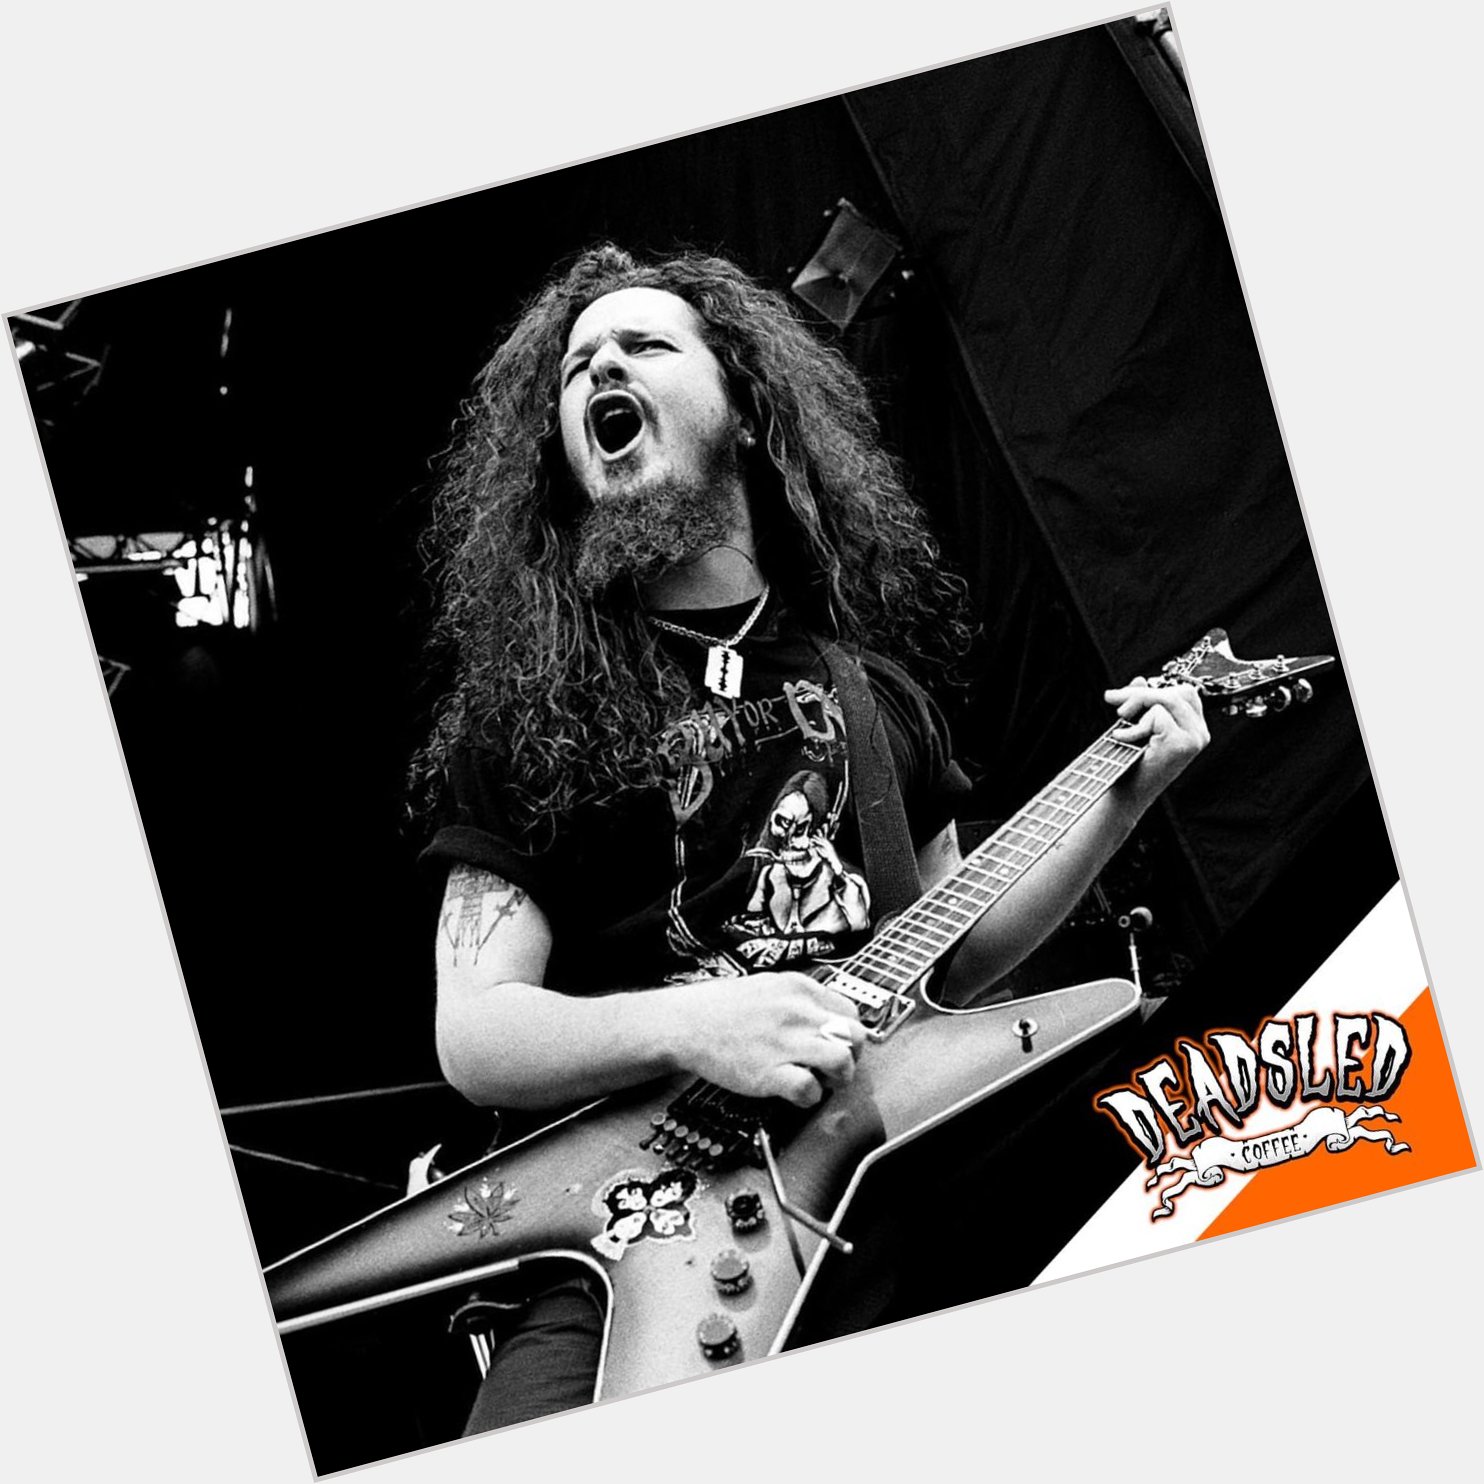 The great Dimebag Darrell would have turned 54 today. Happy birthday to a legend. RIP. 